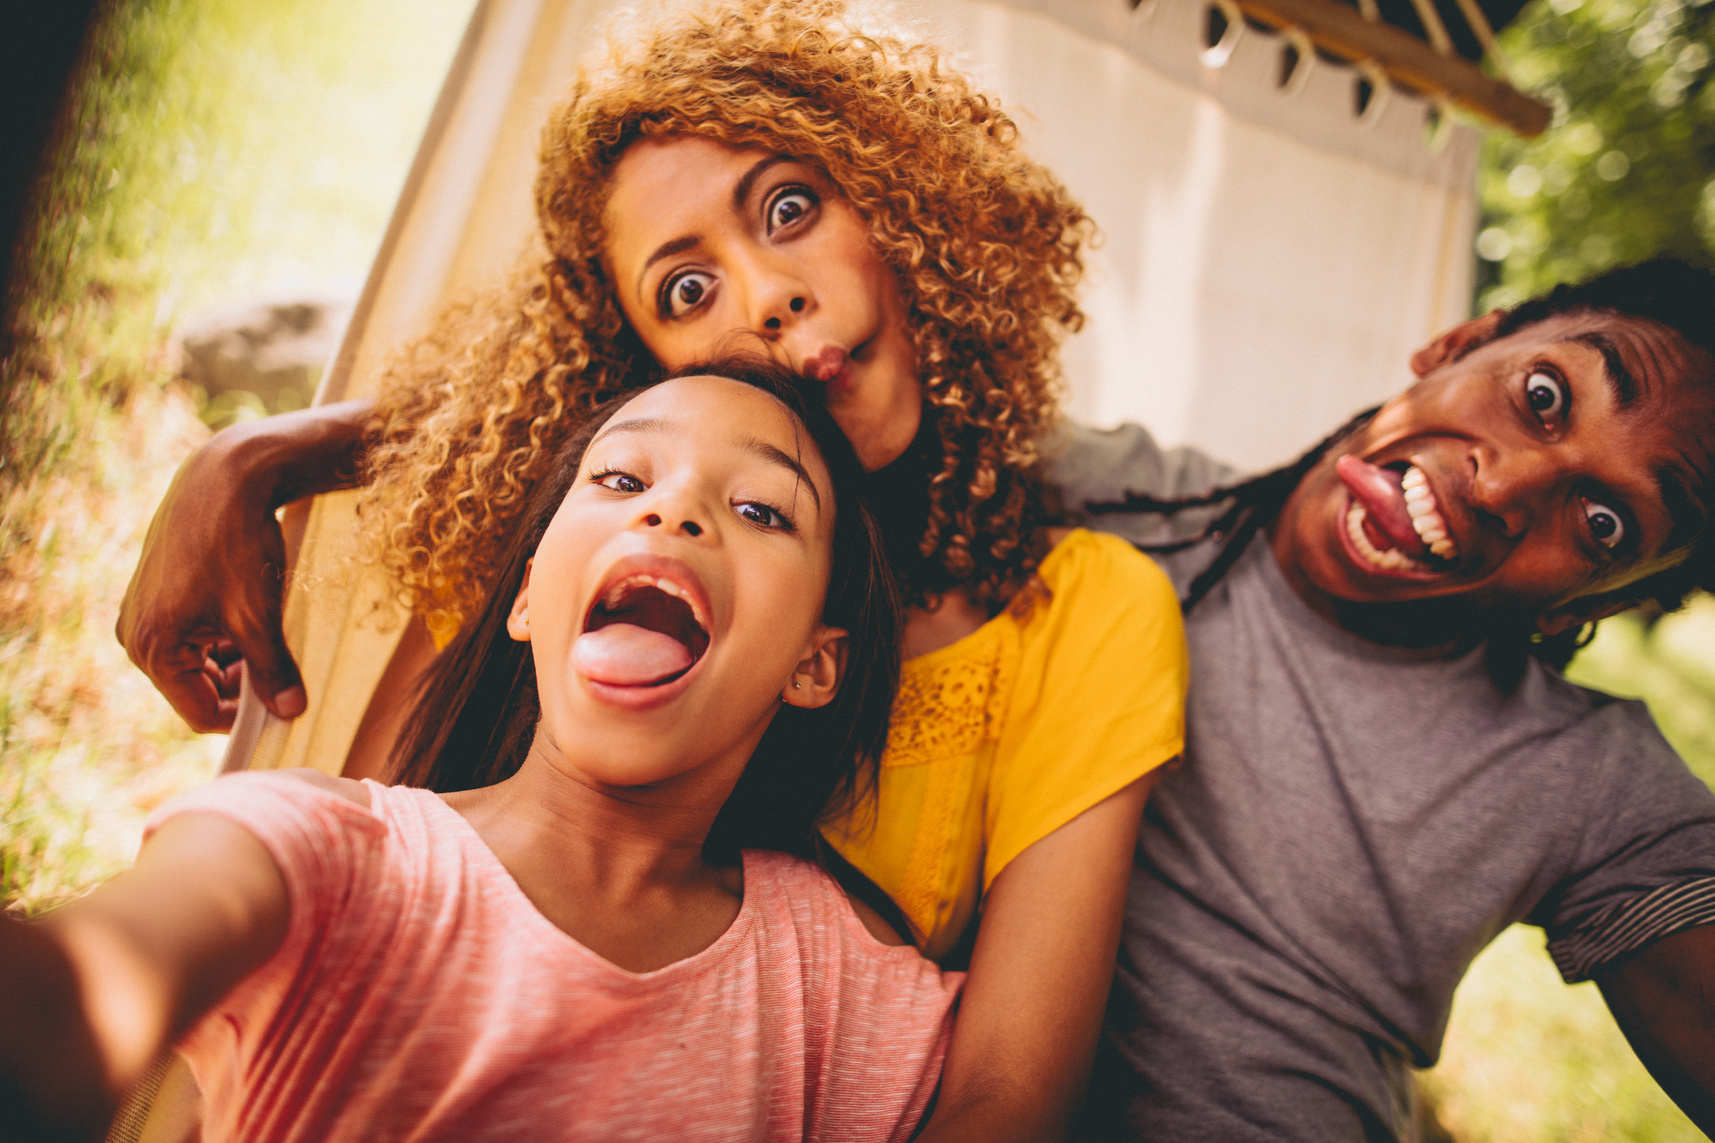 Lovely African-American family making silly faces and posing